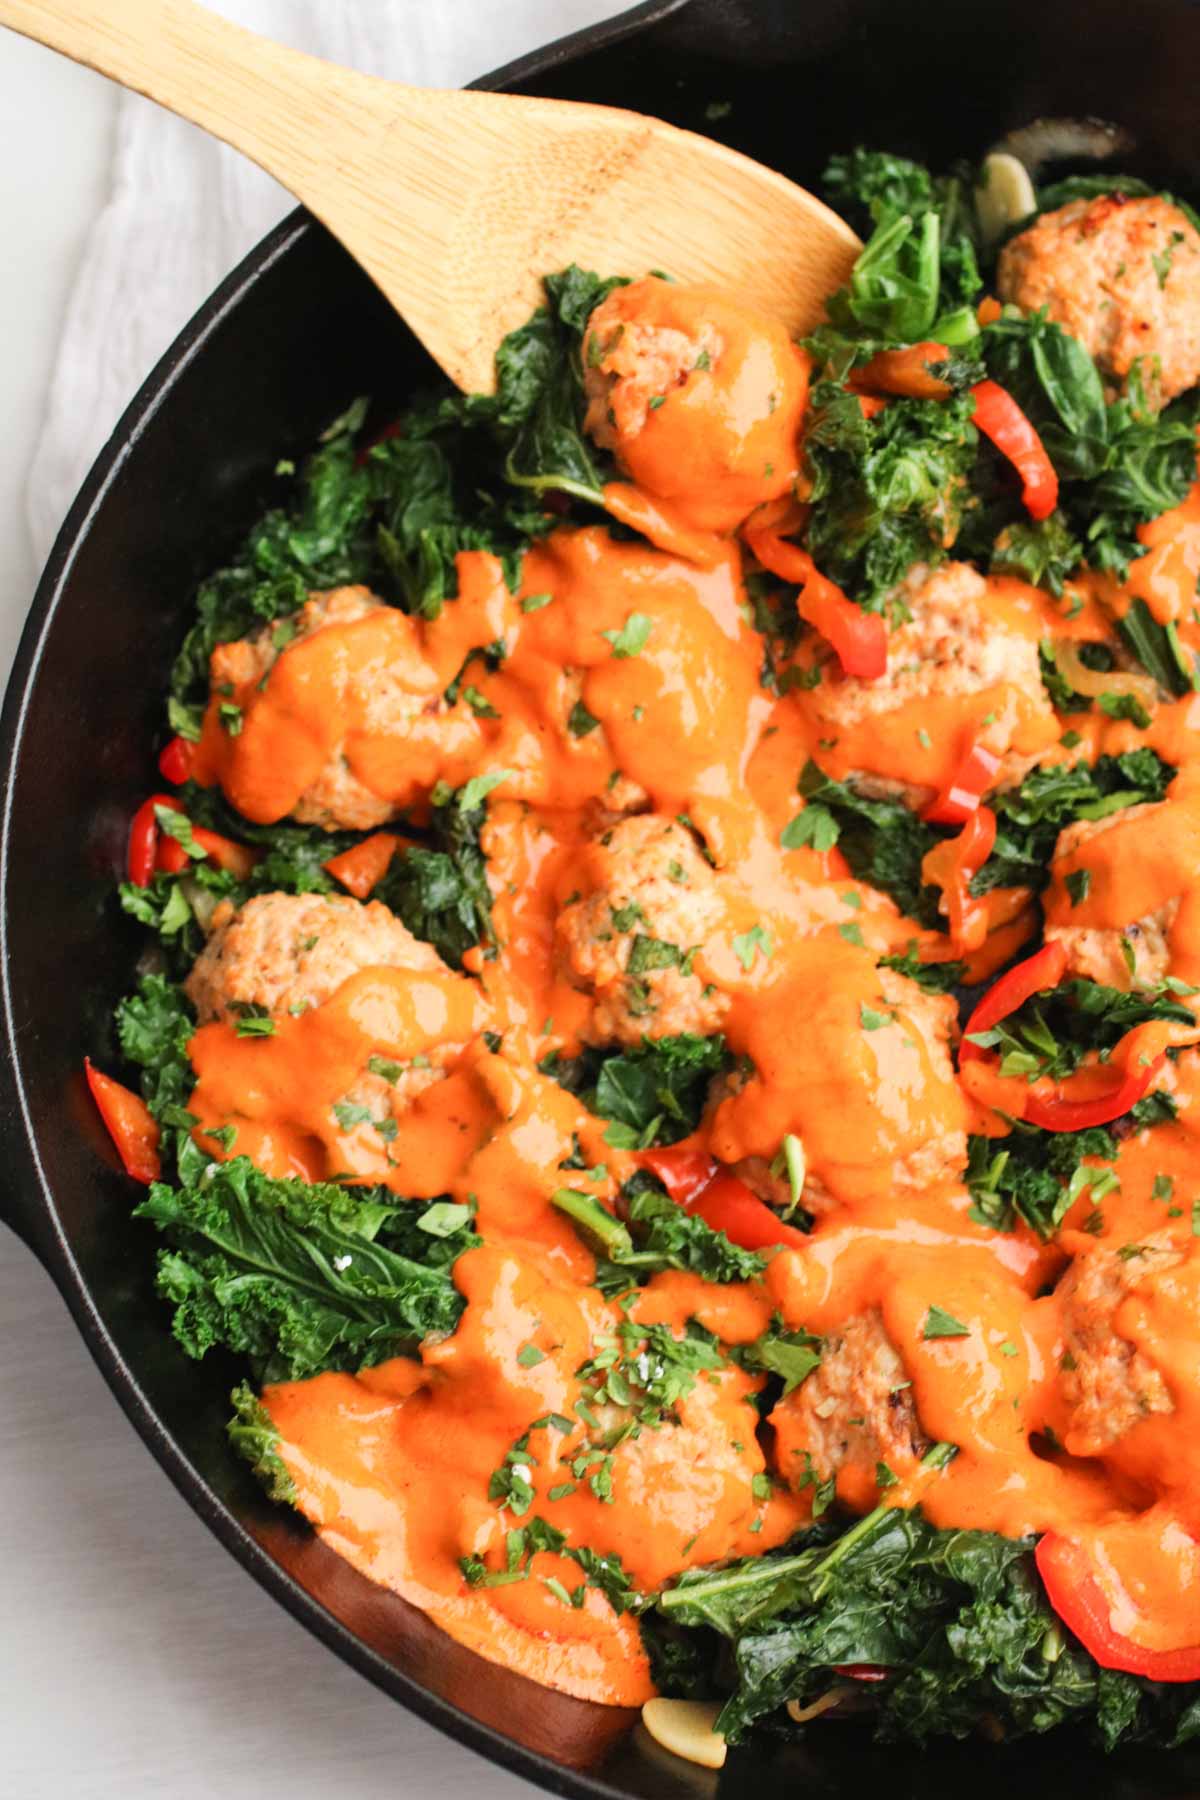 The BEST chicken meatballs in a creamy roasted red pepper feta cheese sauce with sauteed kale. One skillet and OMG, so good! |Abraskitchen.com